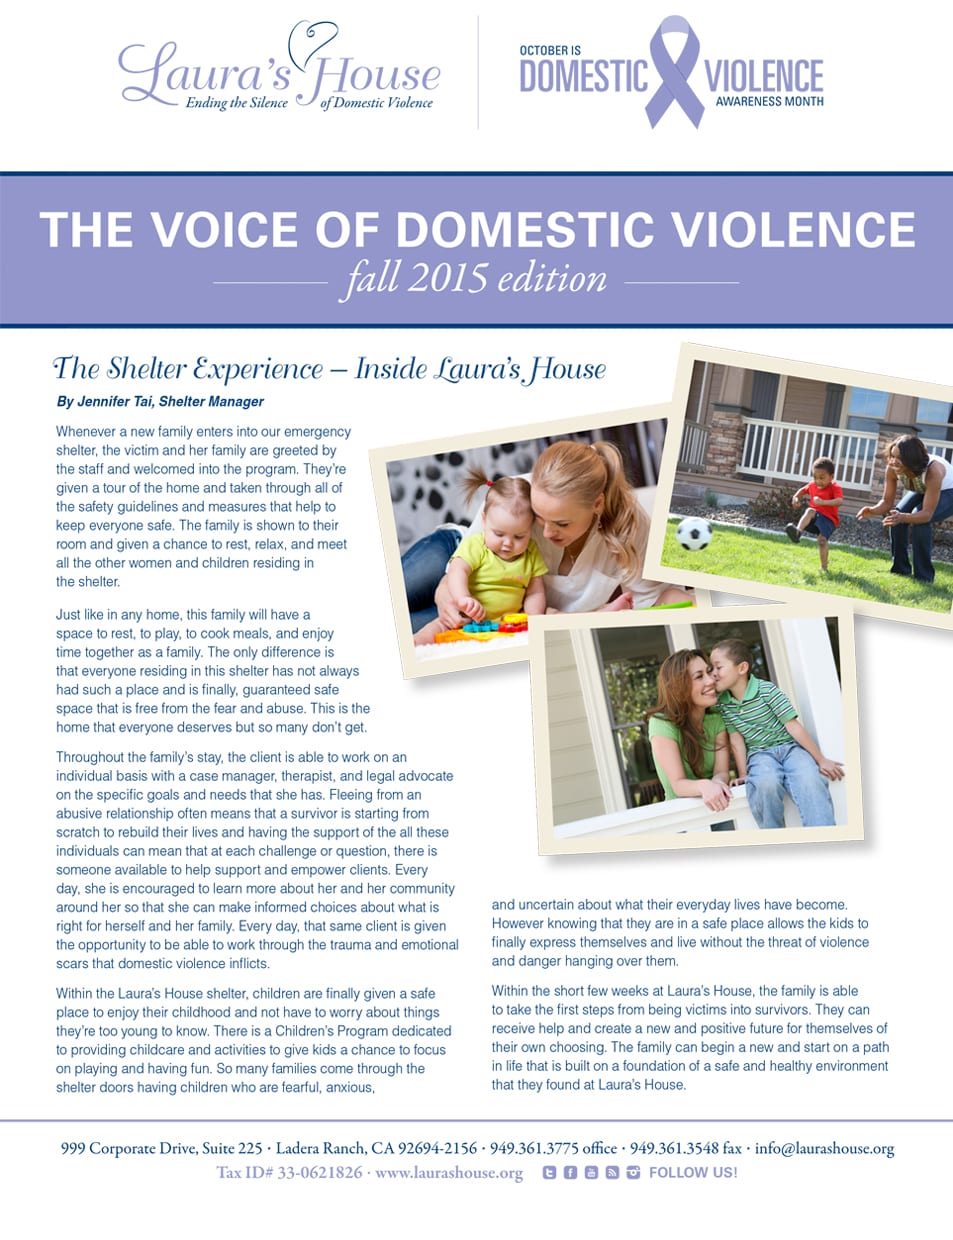 The Voice of Domestic Violence